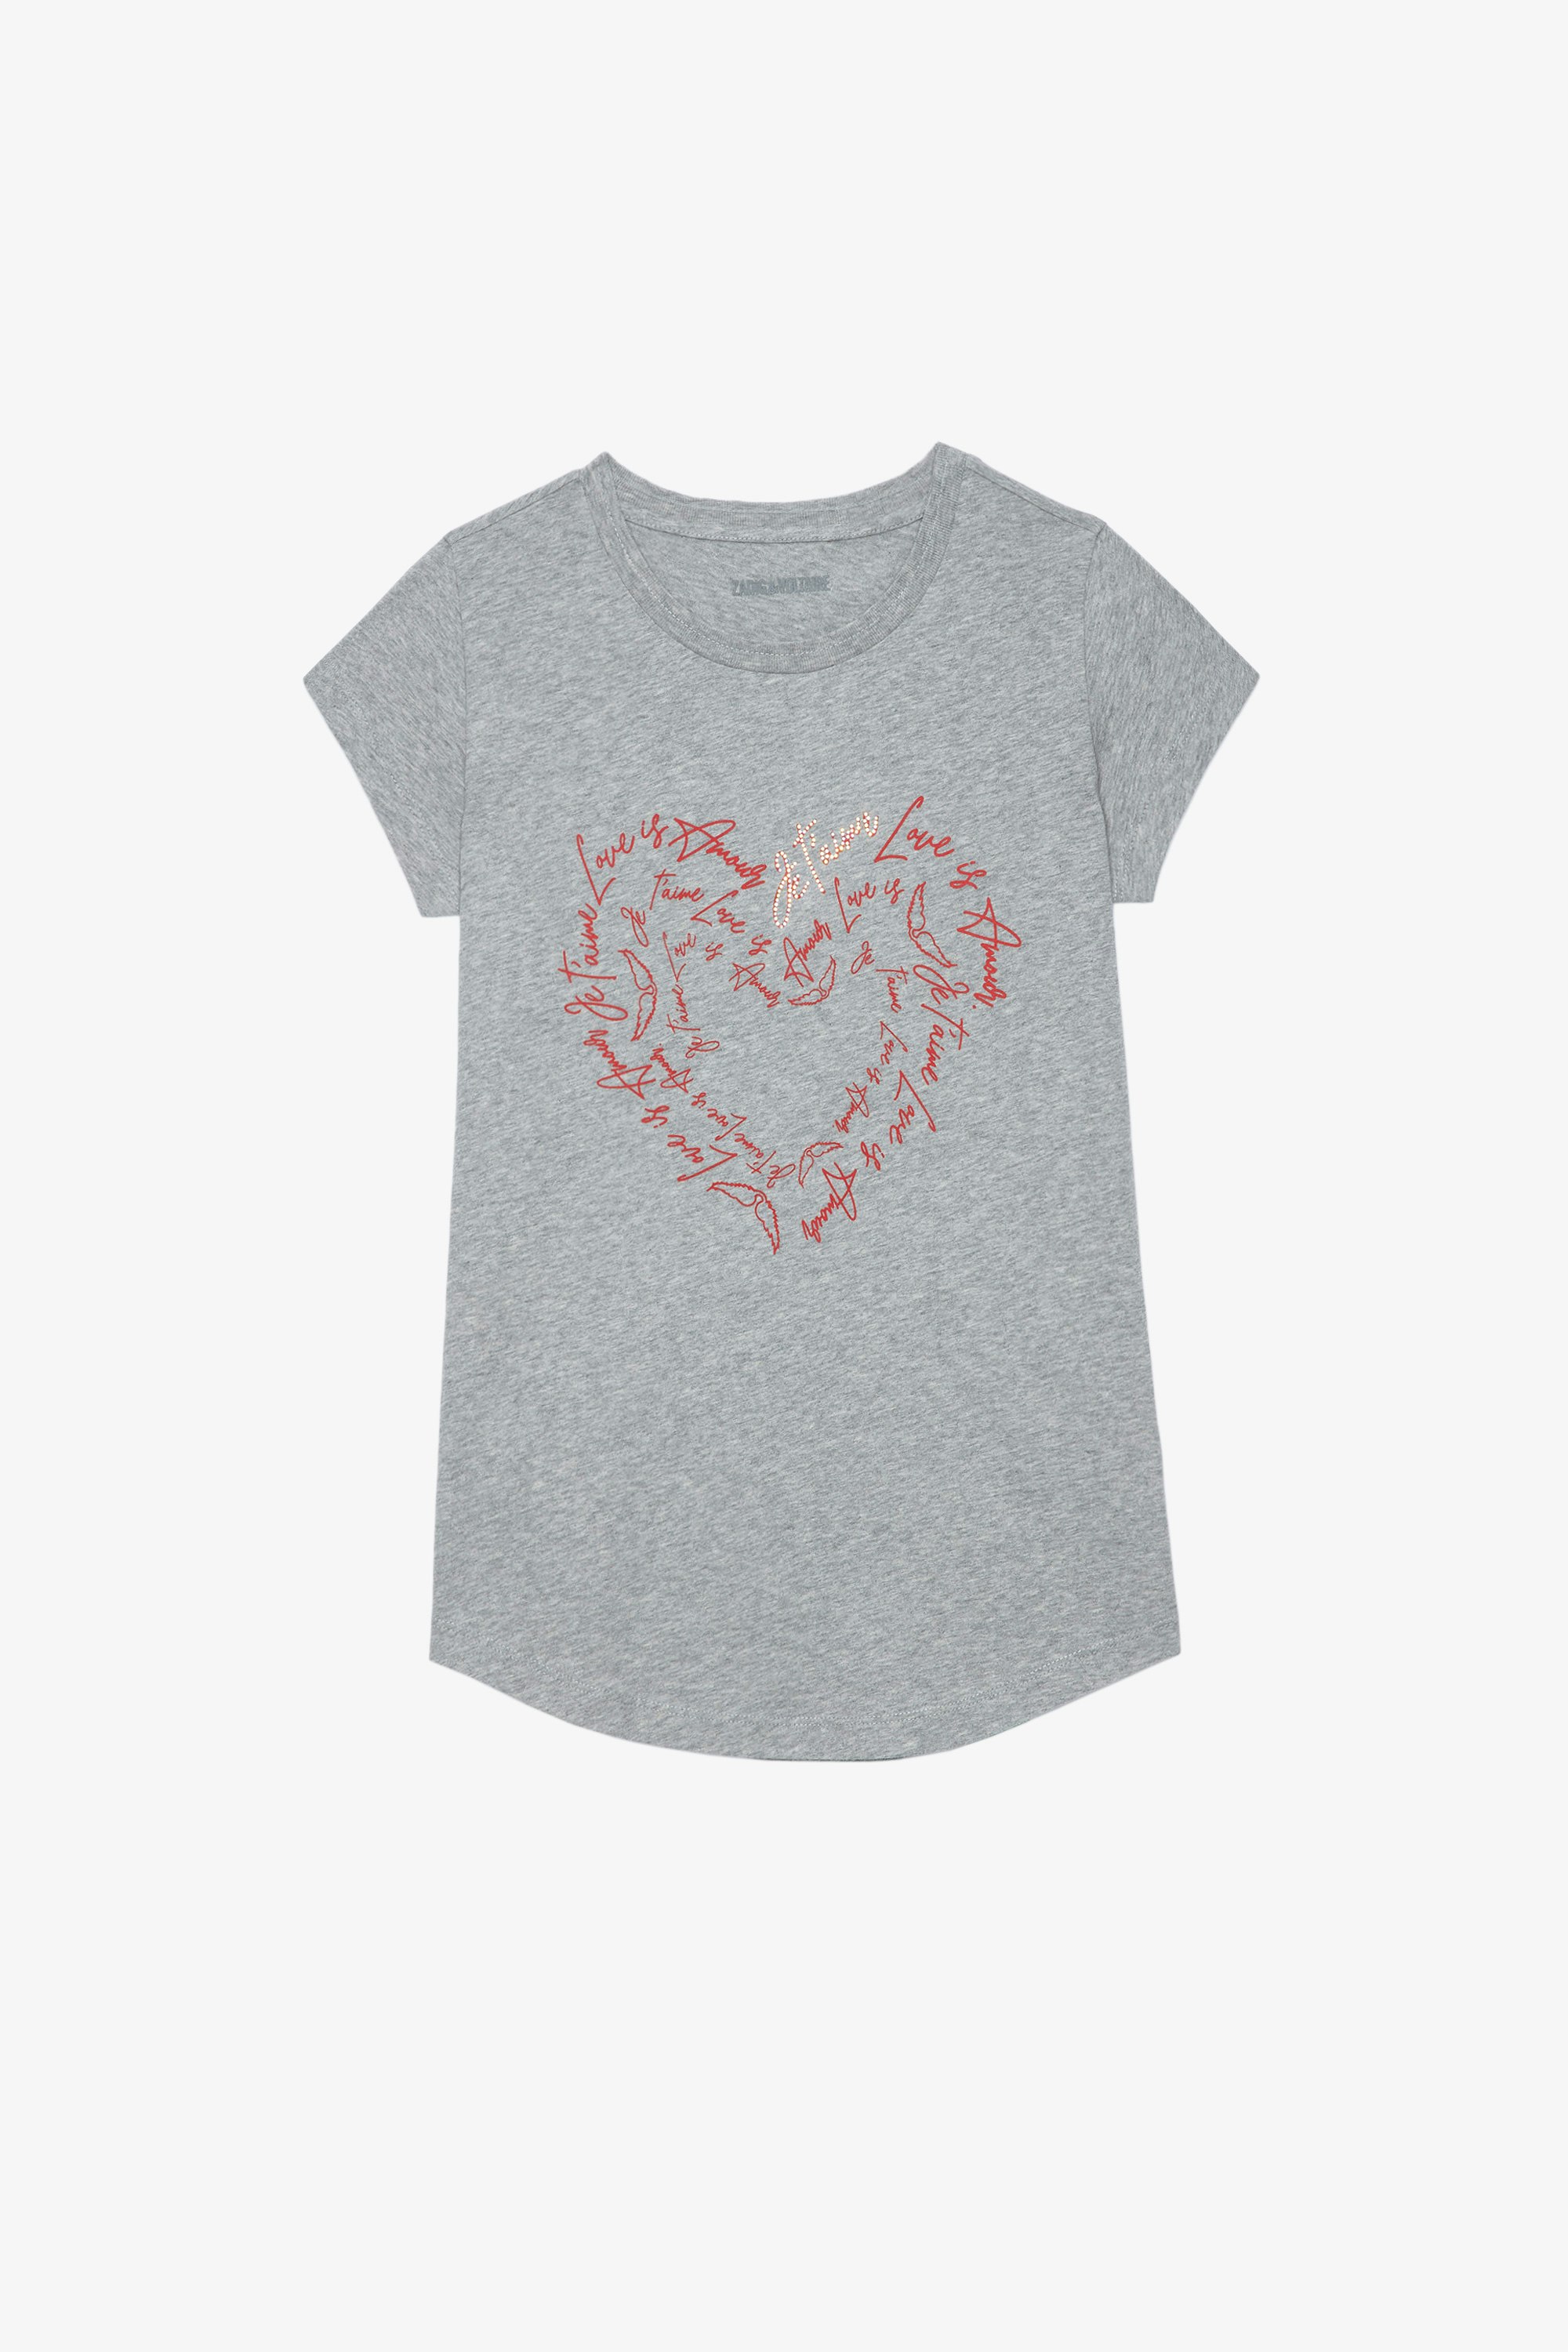 Skinny Heart T-shirt Women’s grey marl cotton T-shirt with heart print and crystals